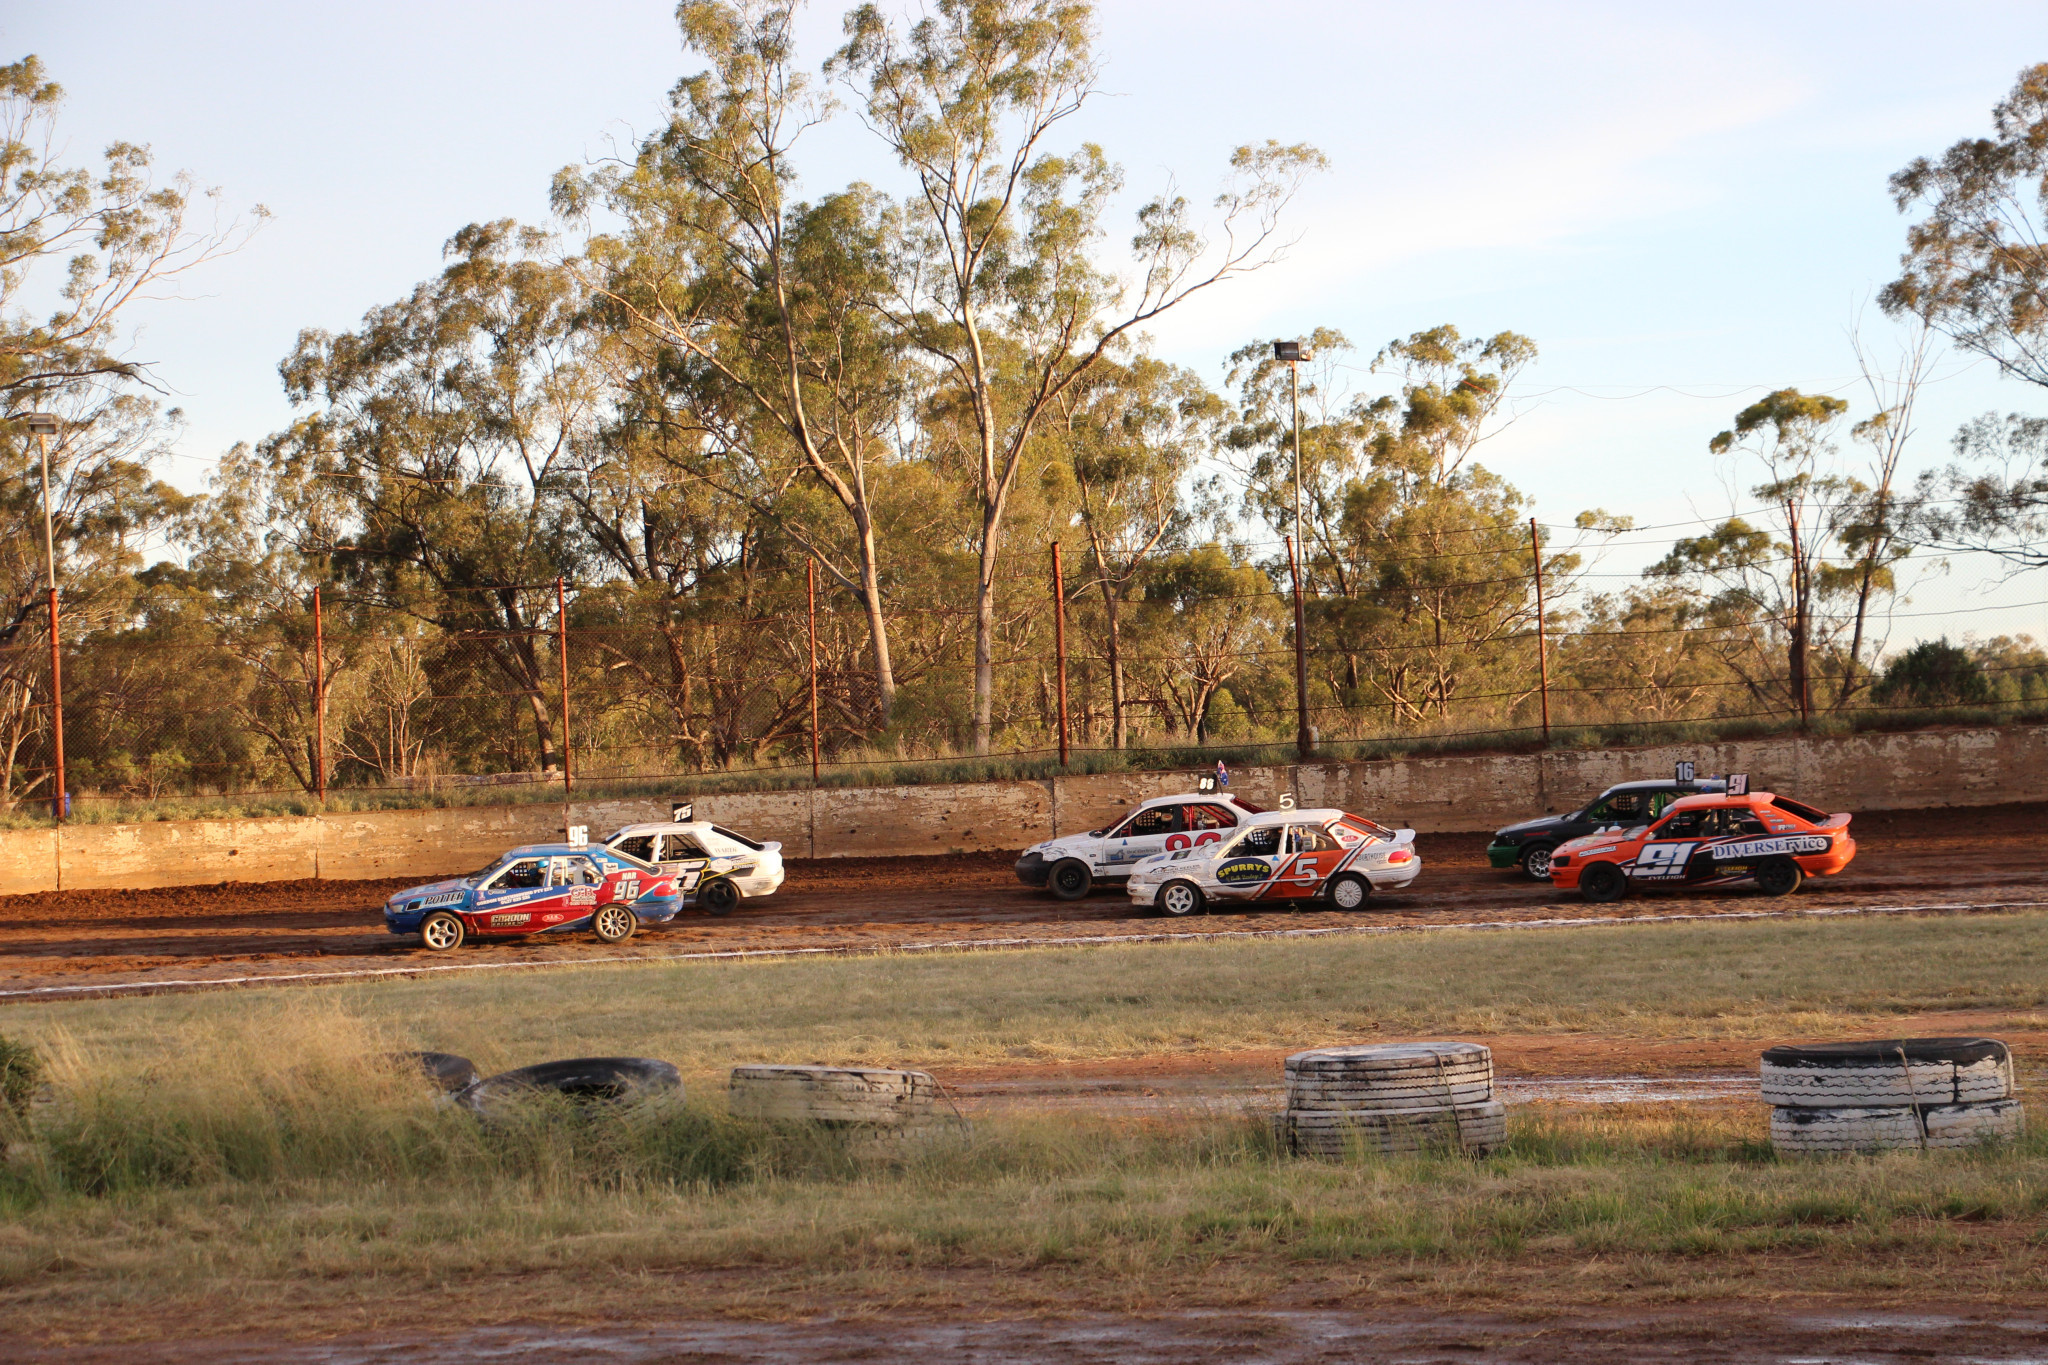 RSA Juniors in action. Photos by The Gilgandra Weekly: Lucie Peart.